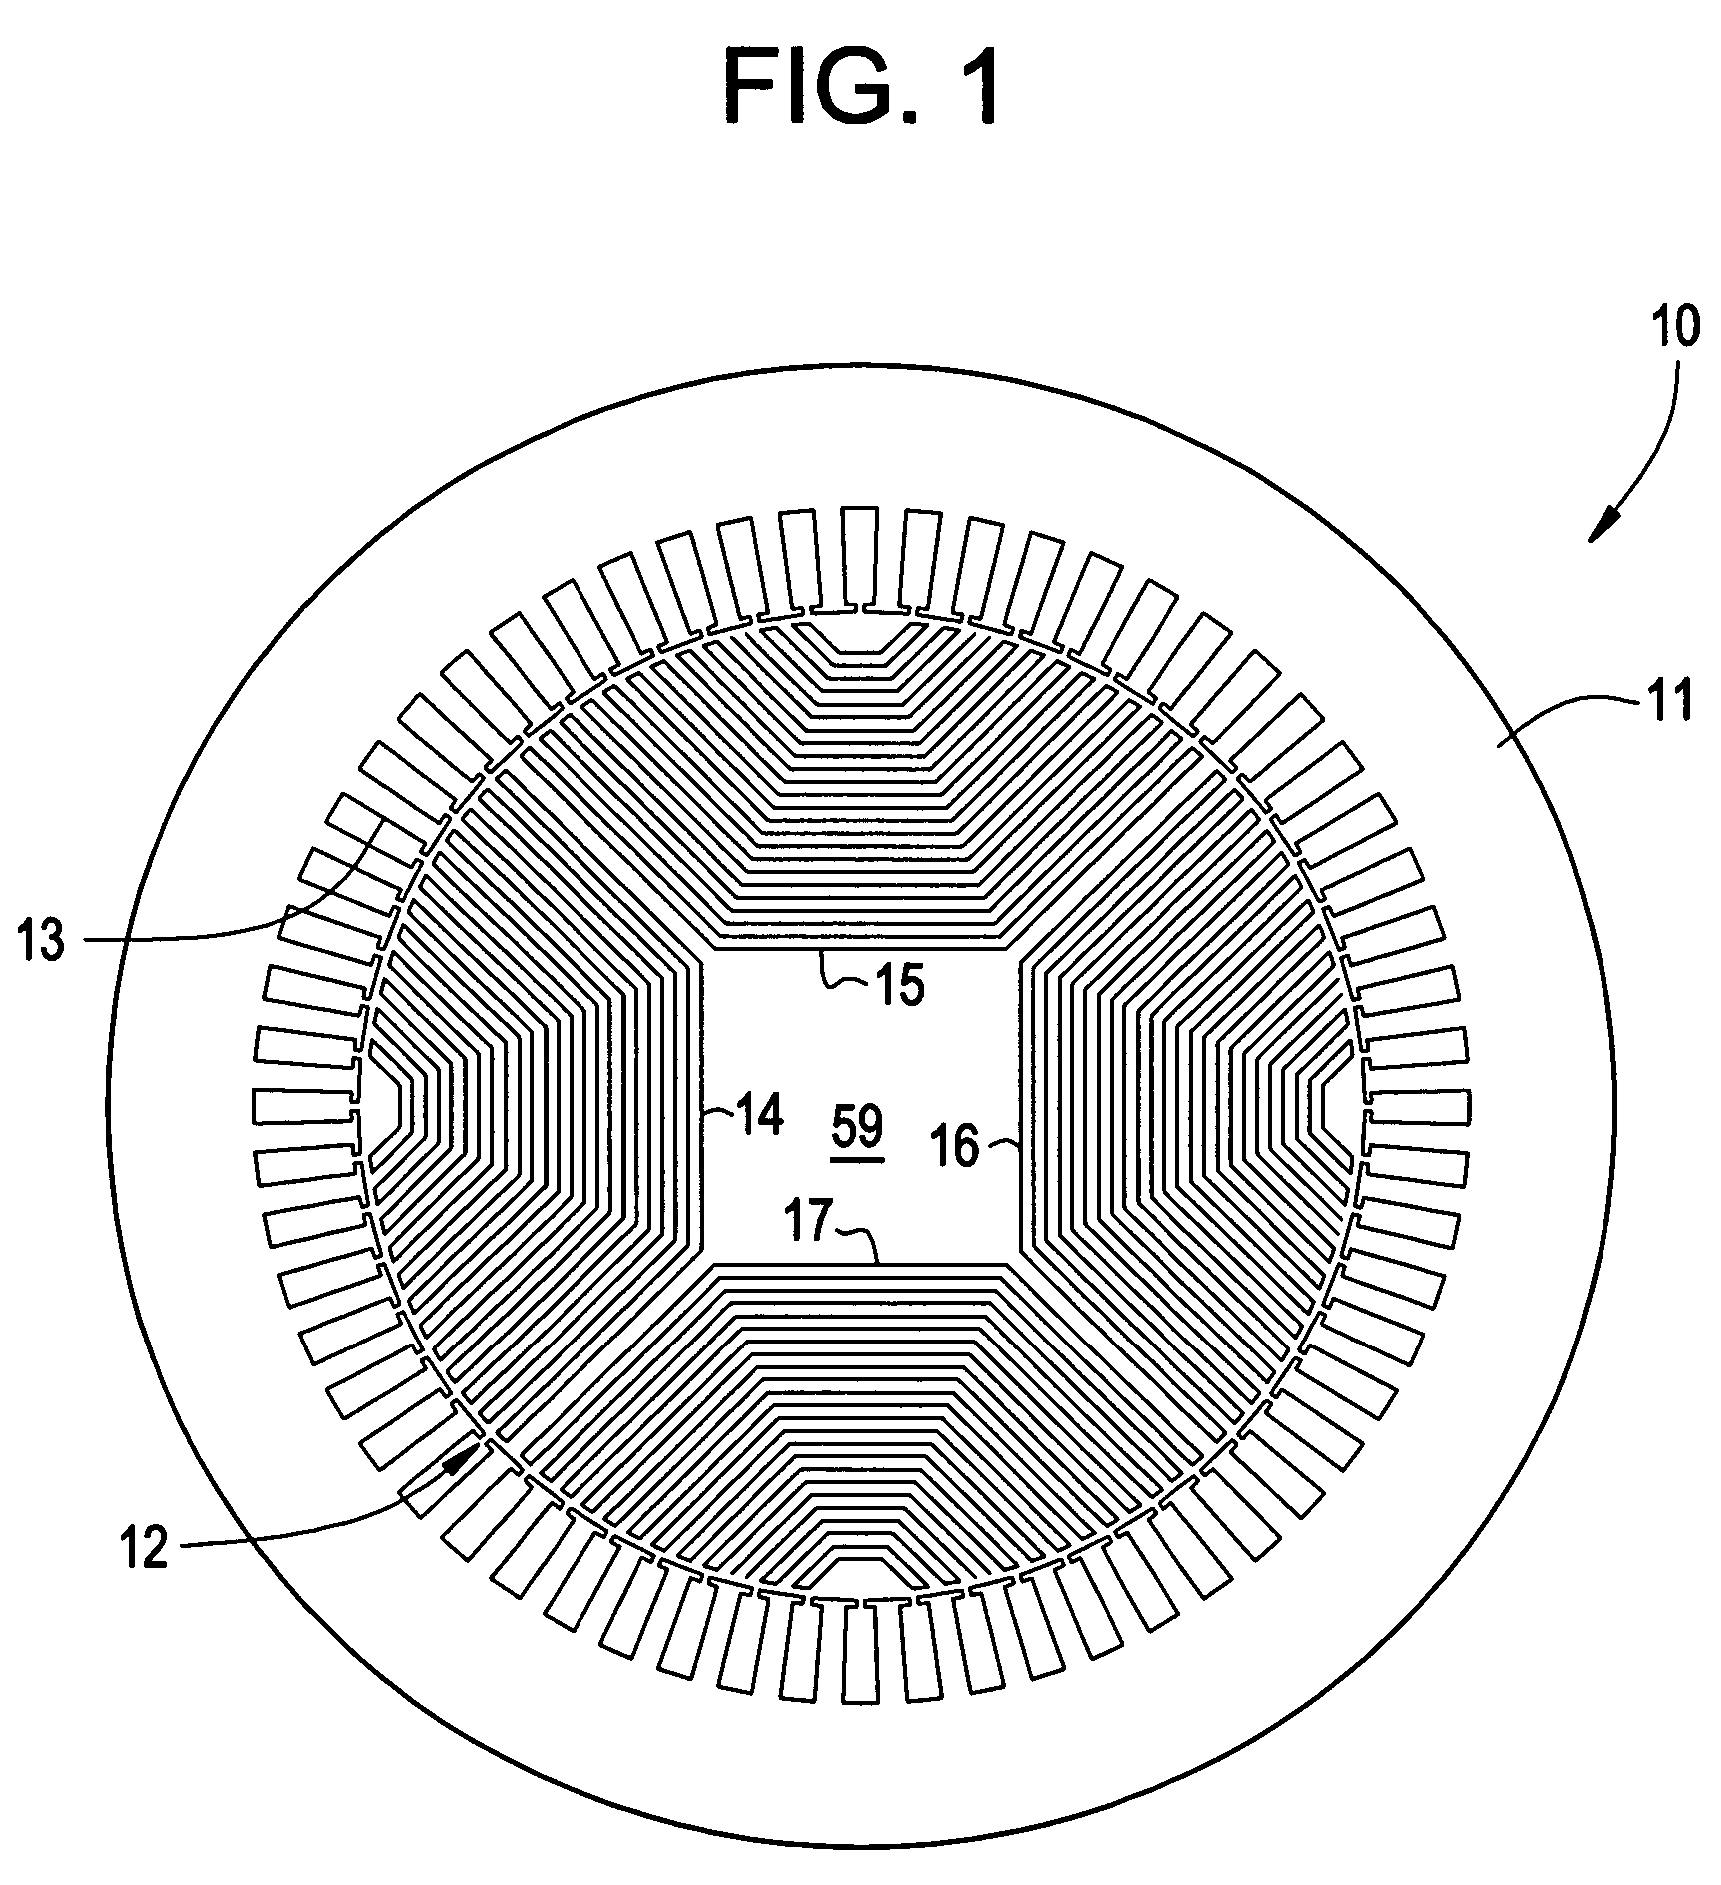 Synchronous reluctance machine with a novel rotor topology